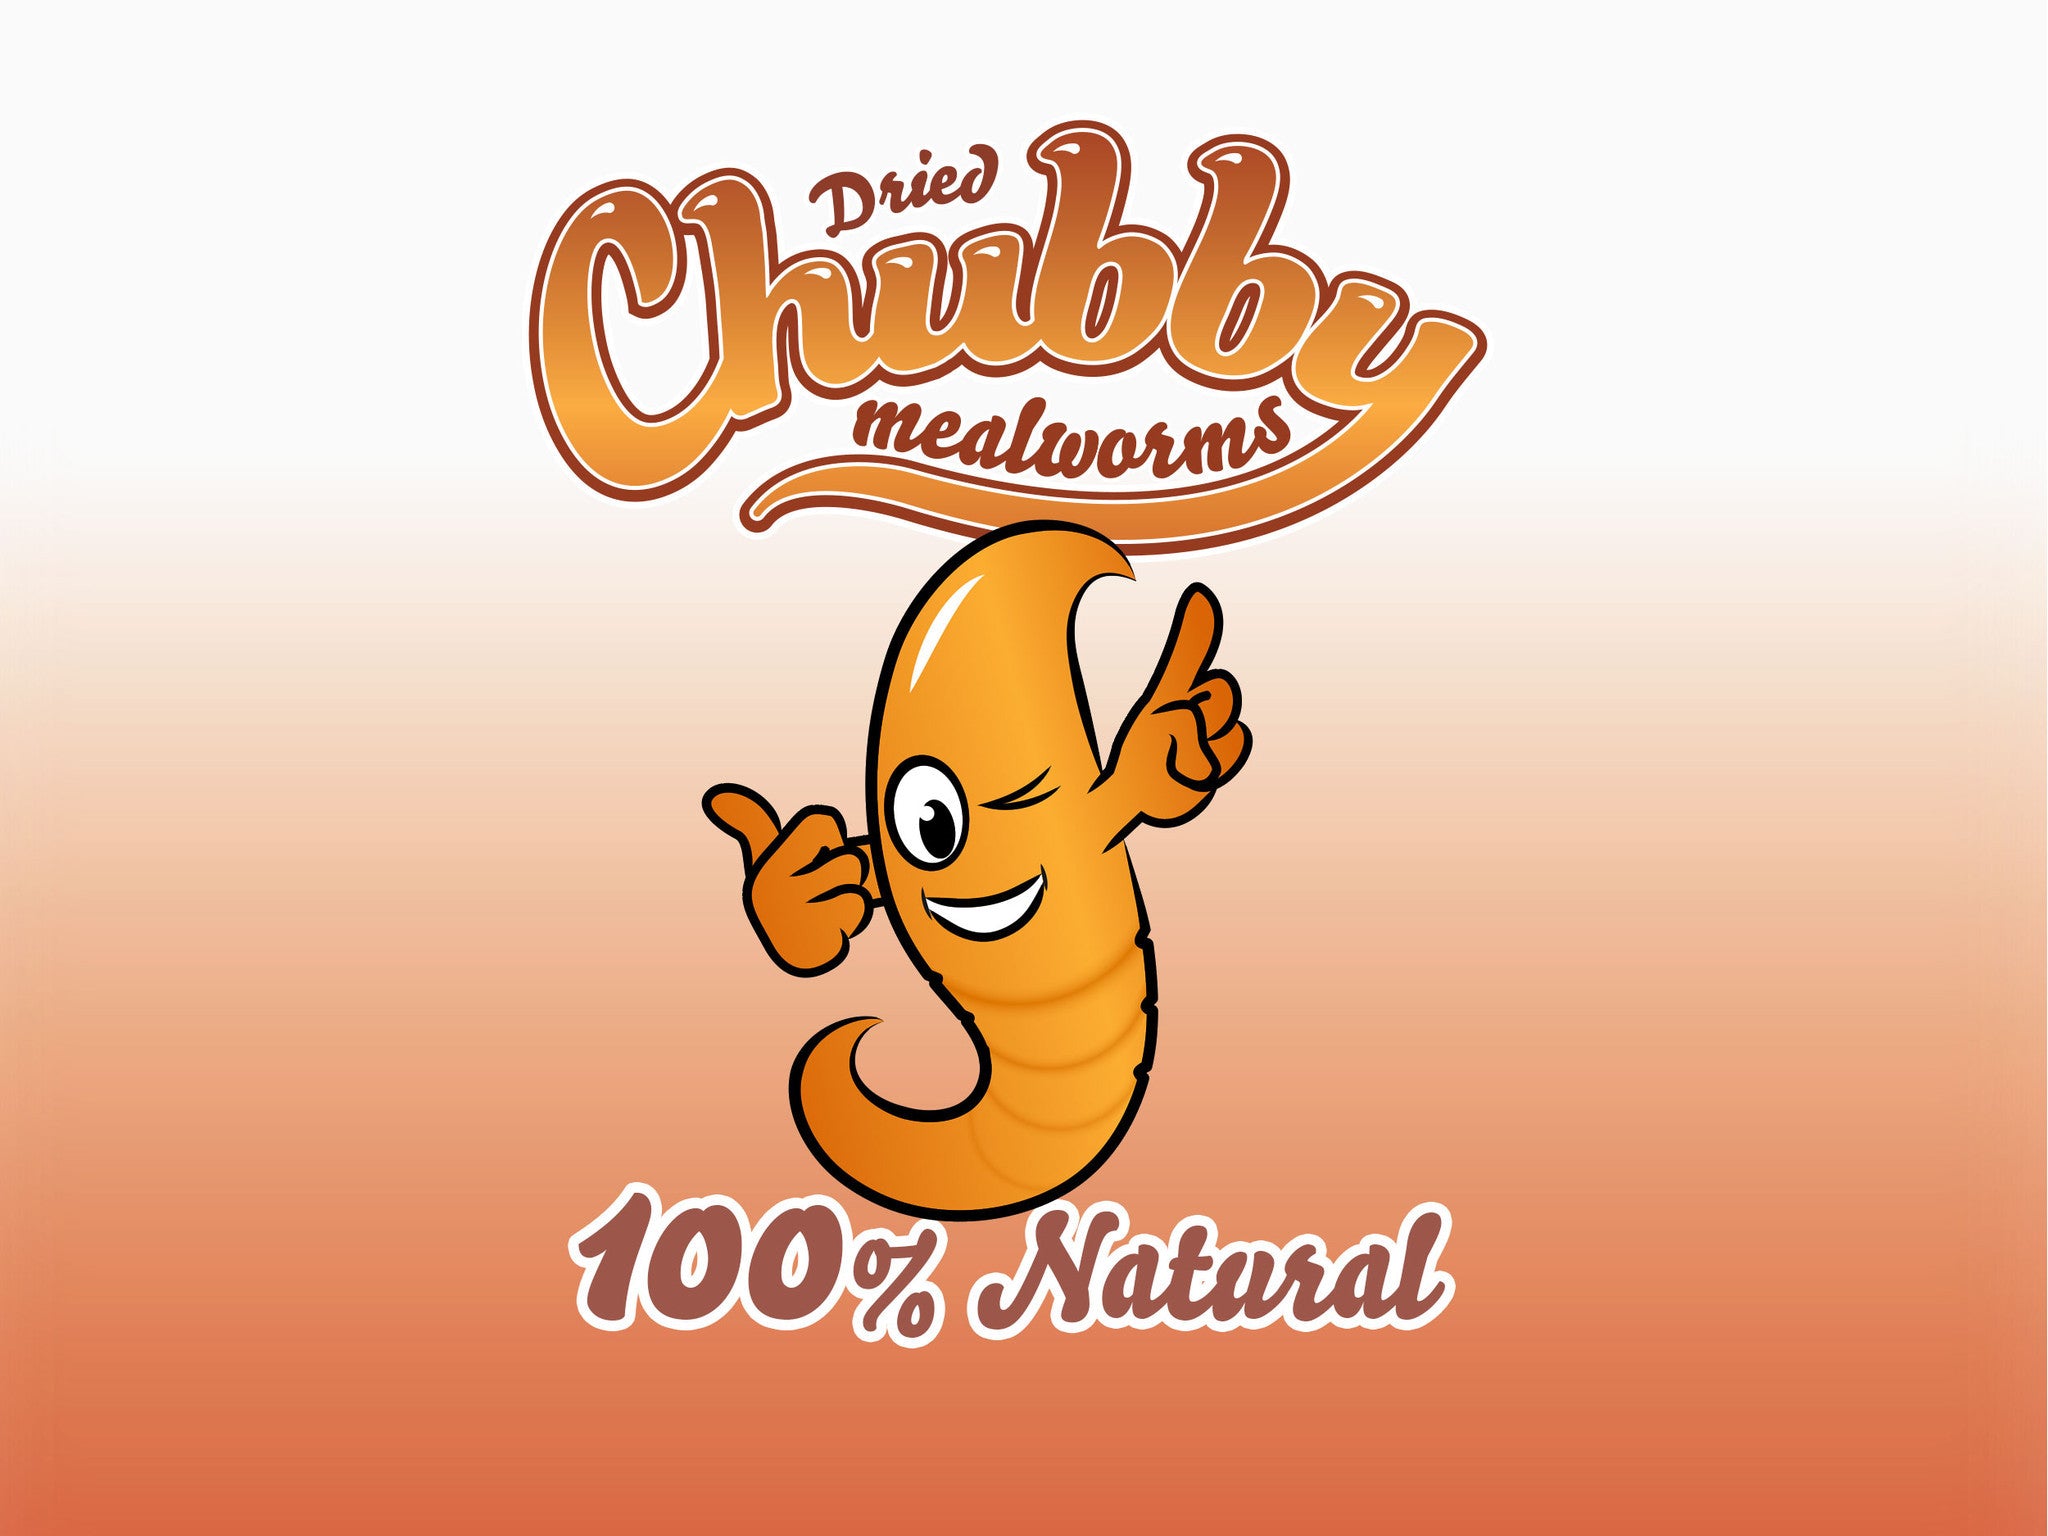 19.96Kg (44Lbs) Dried Chubby Mealworms -  - 8